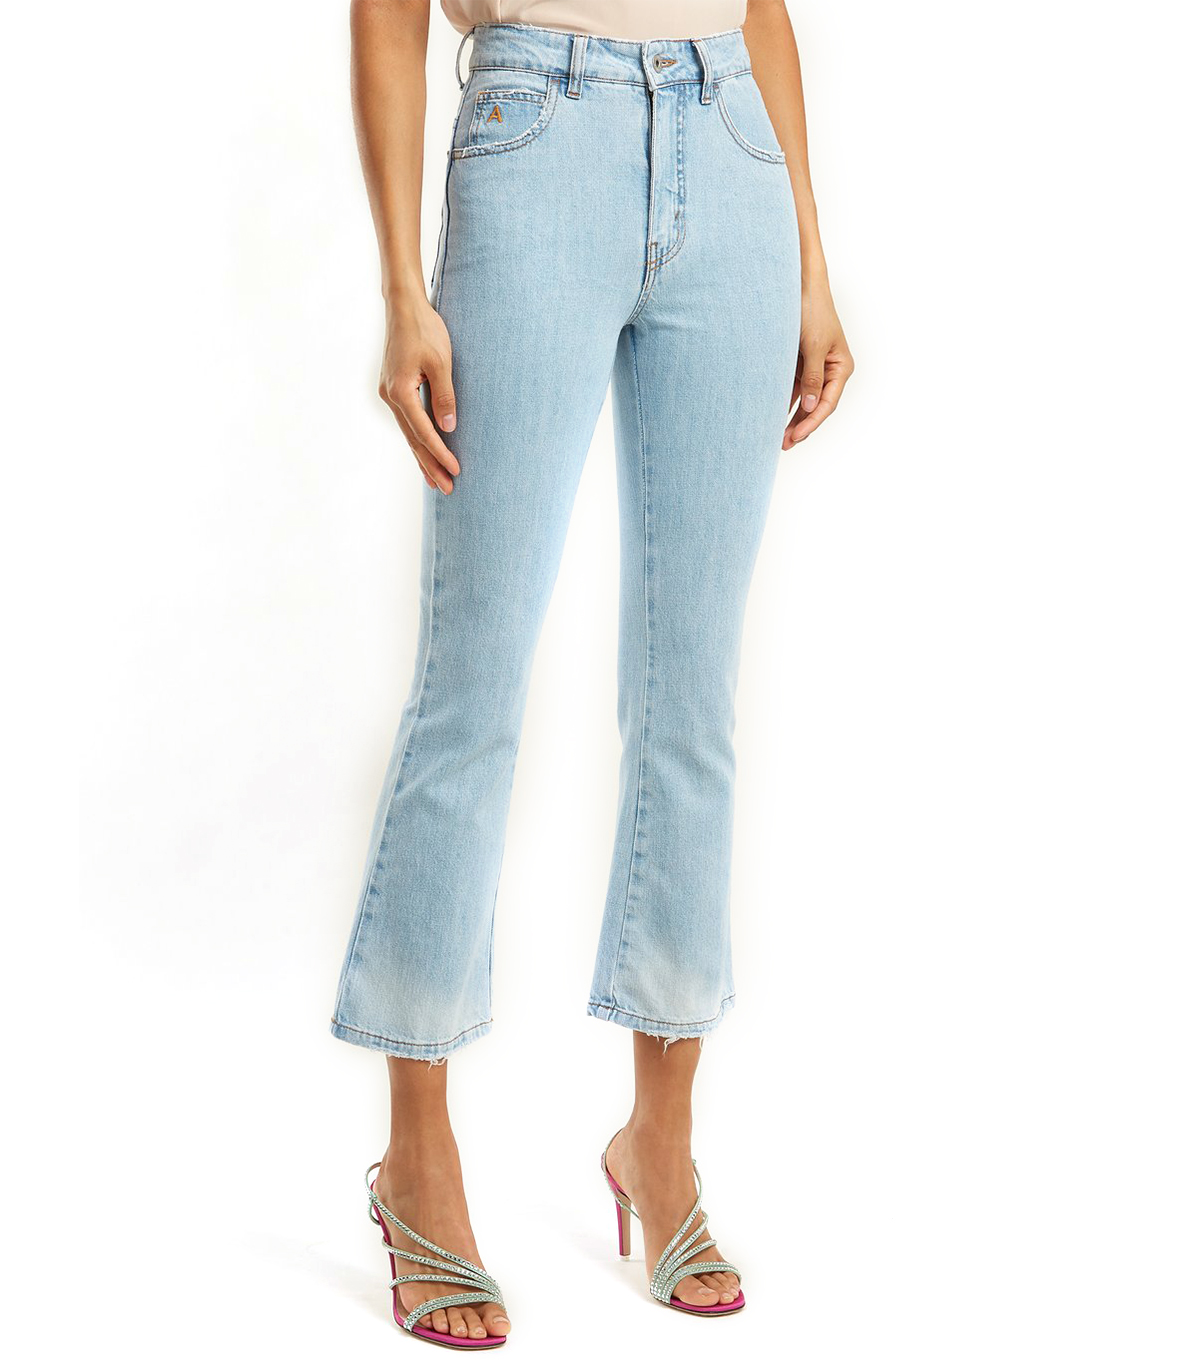 cropped jeans for short legs